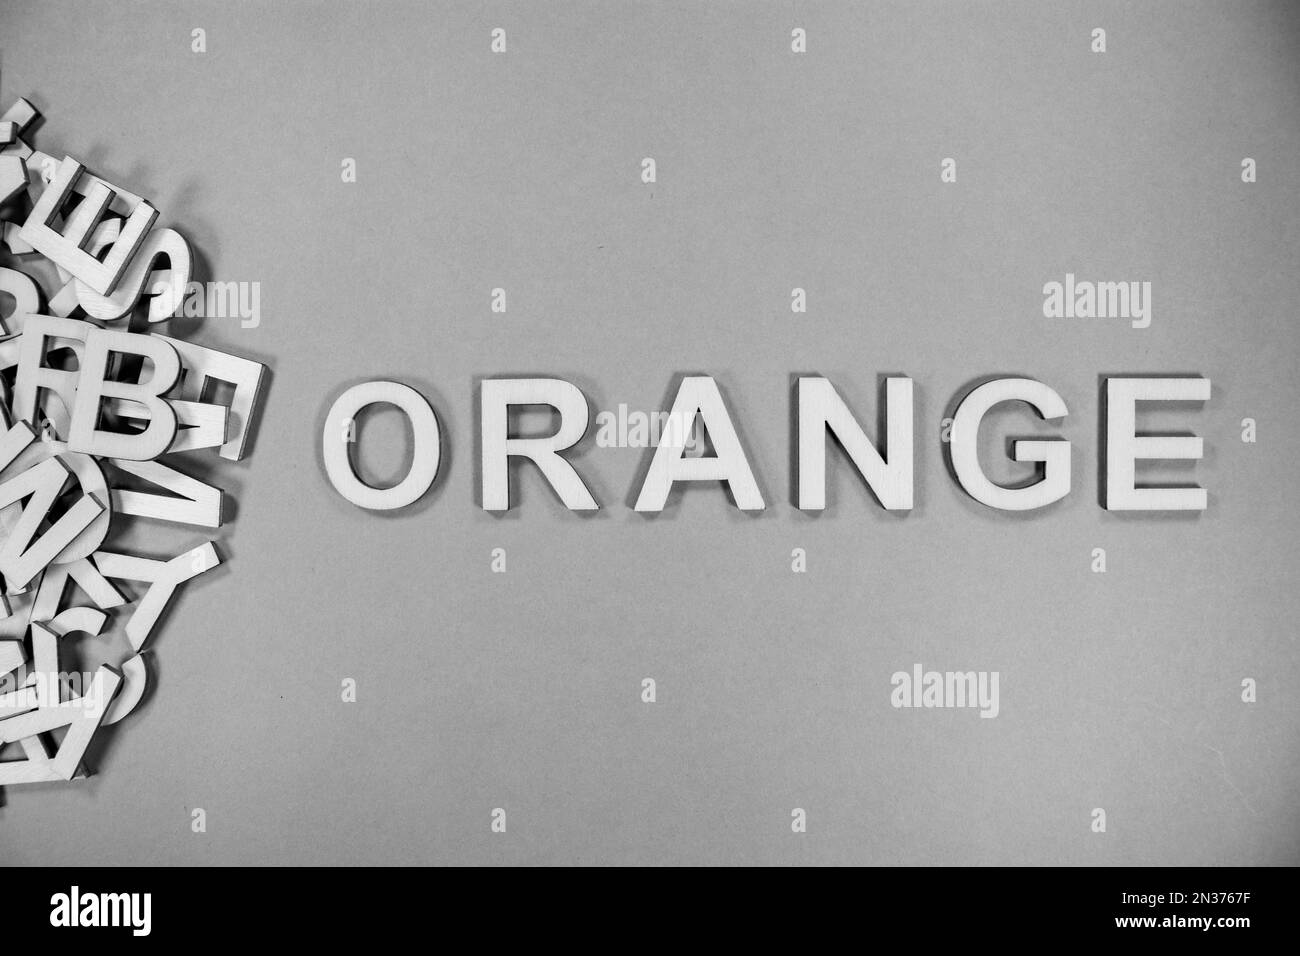 ORANGE in wooden English language capital letters spilling from a pile of letters in black and white Stock Photo